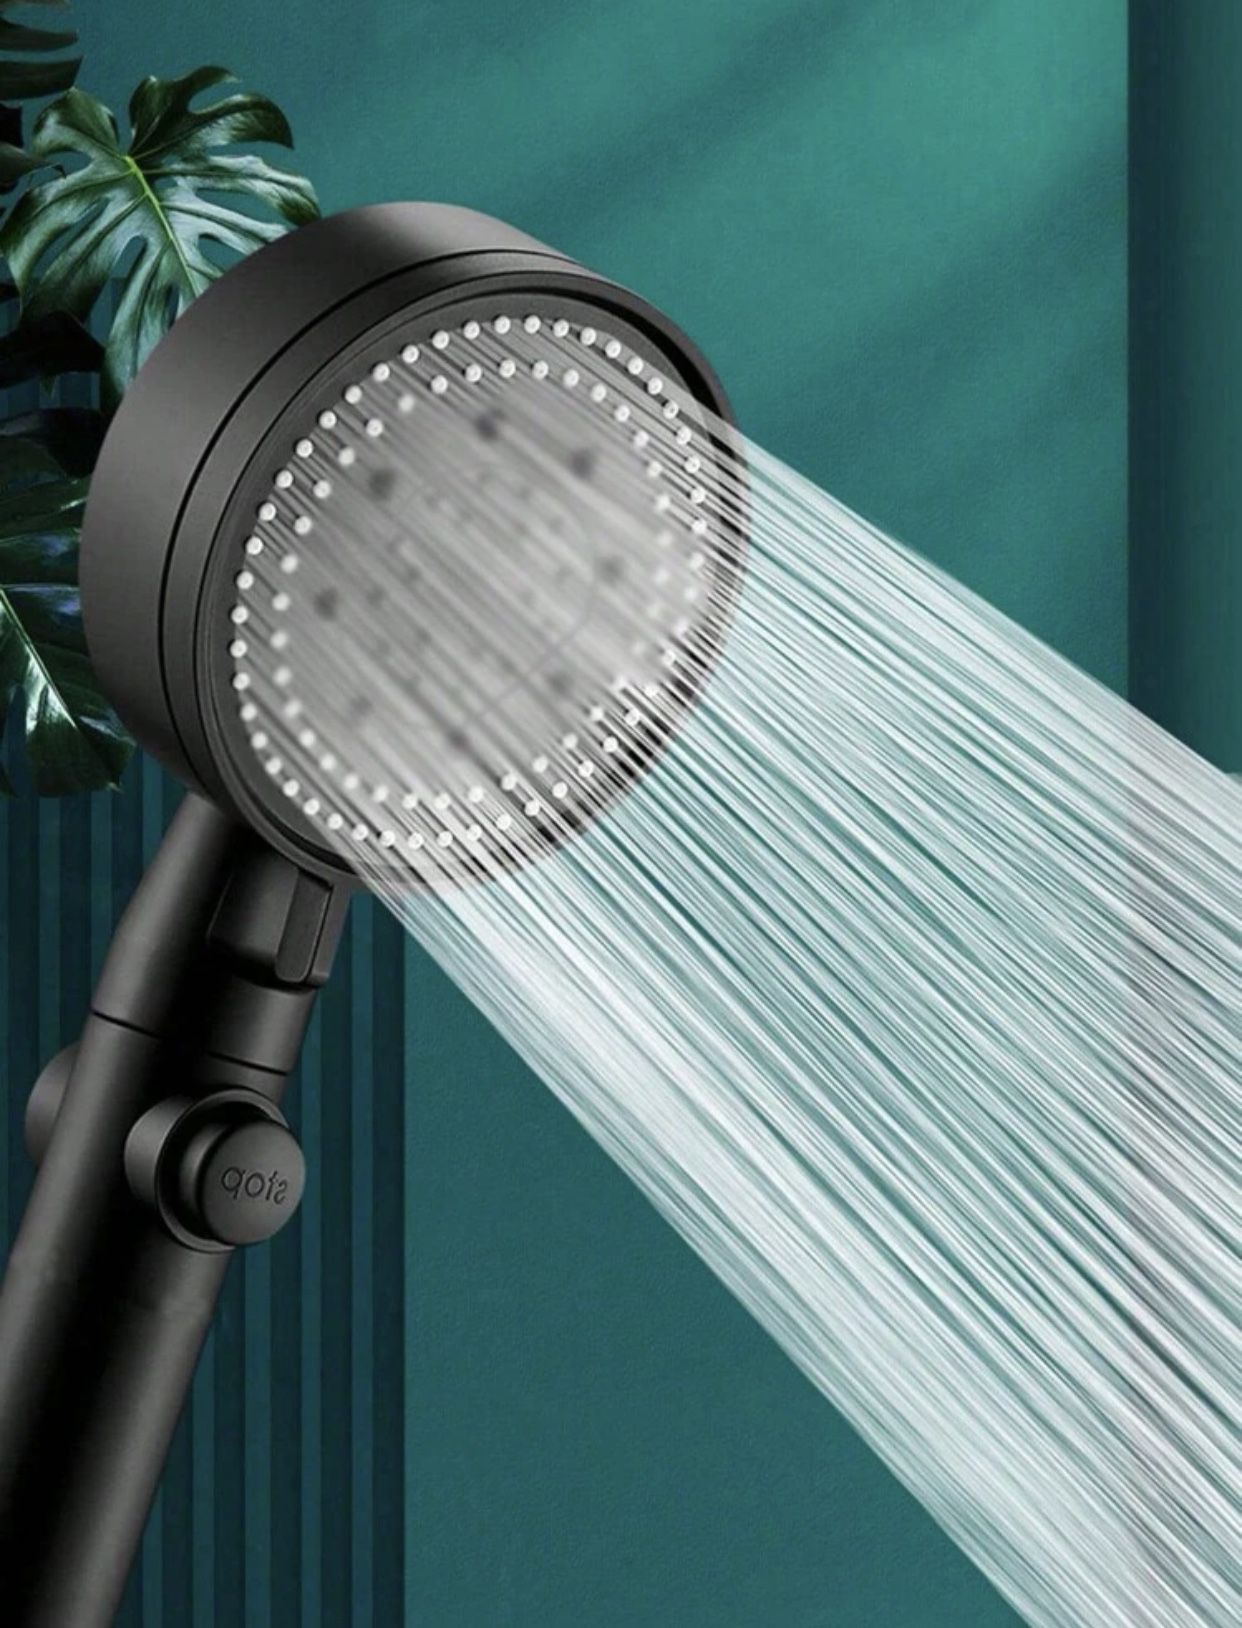 1pc High-Pressure Shower Head, Multi-Functional Hand Held Sprinkler With 5 Modes, 360°Adjustable Detachable Hydro Jet Shower Head With Pause Switch, A